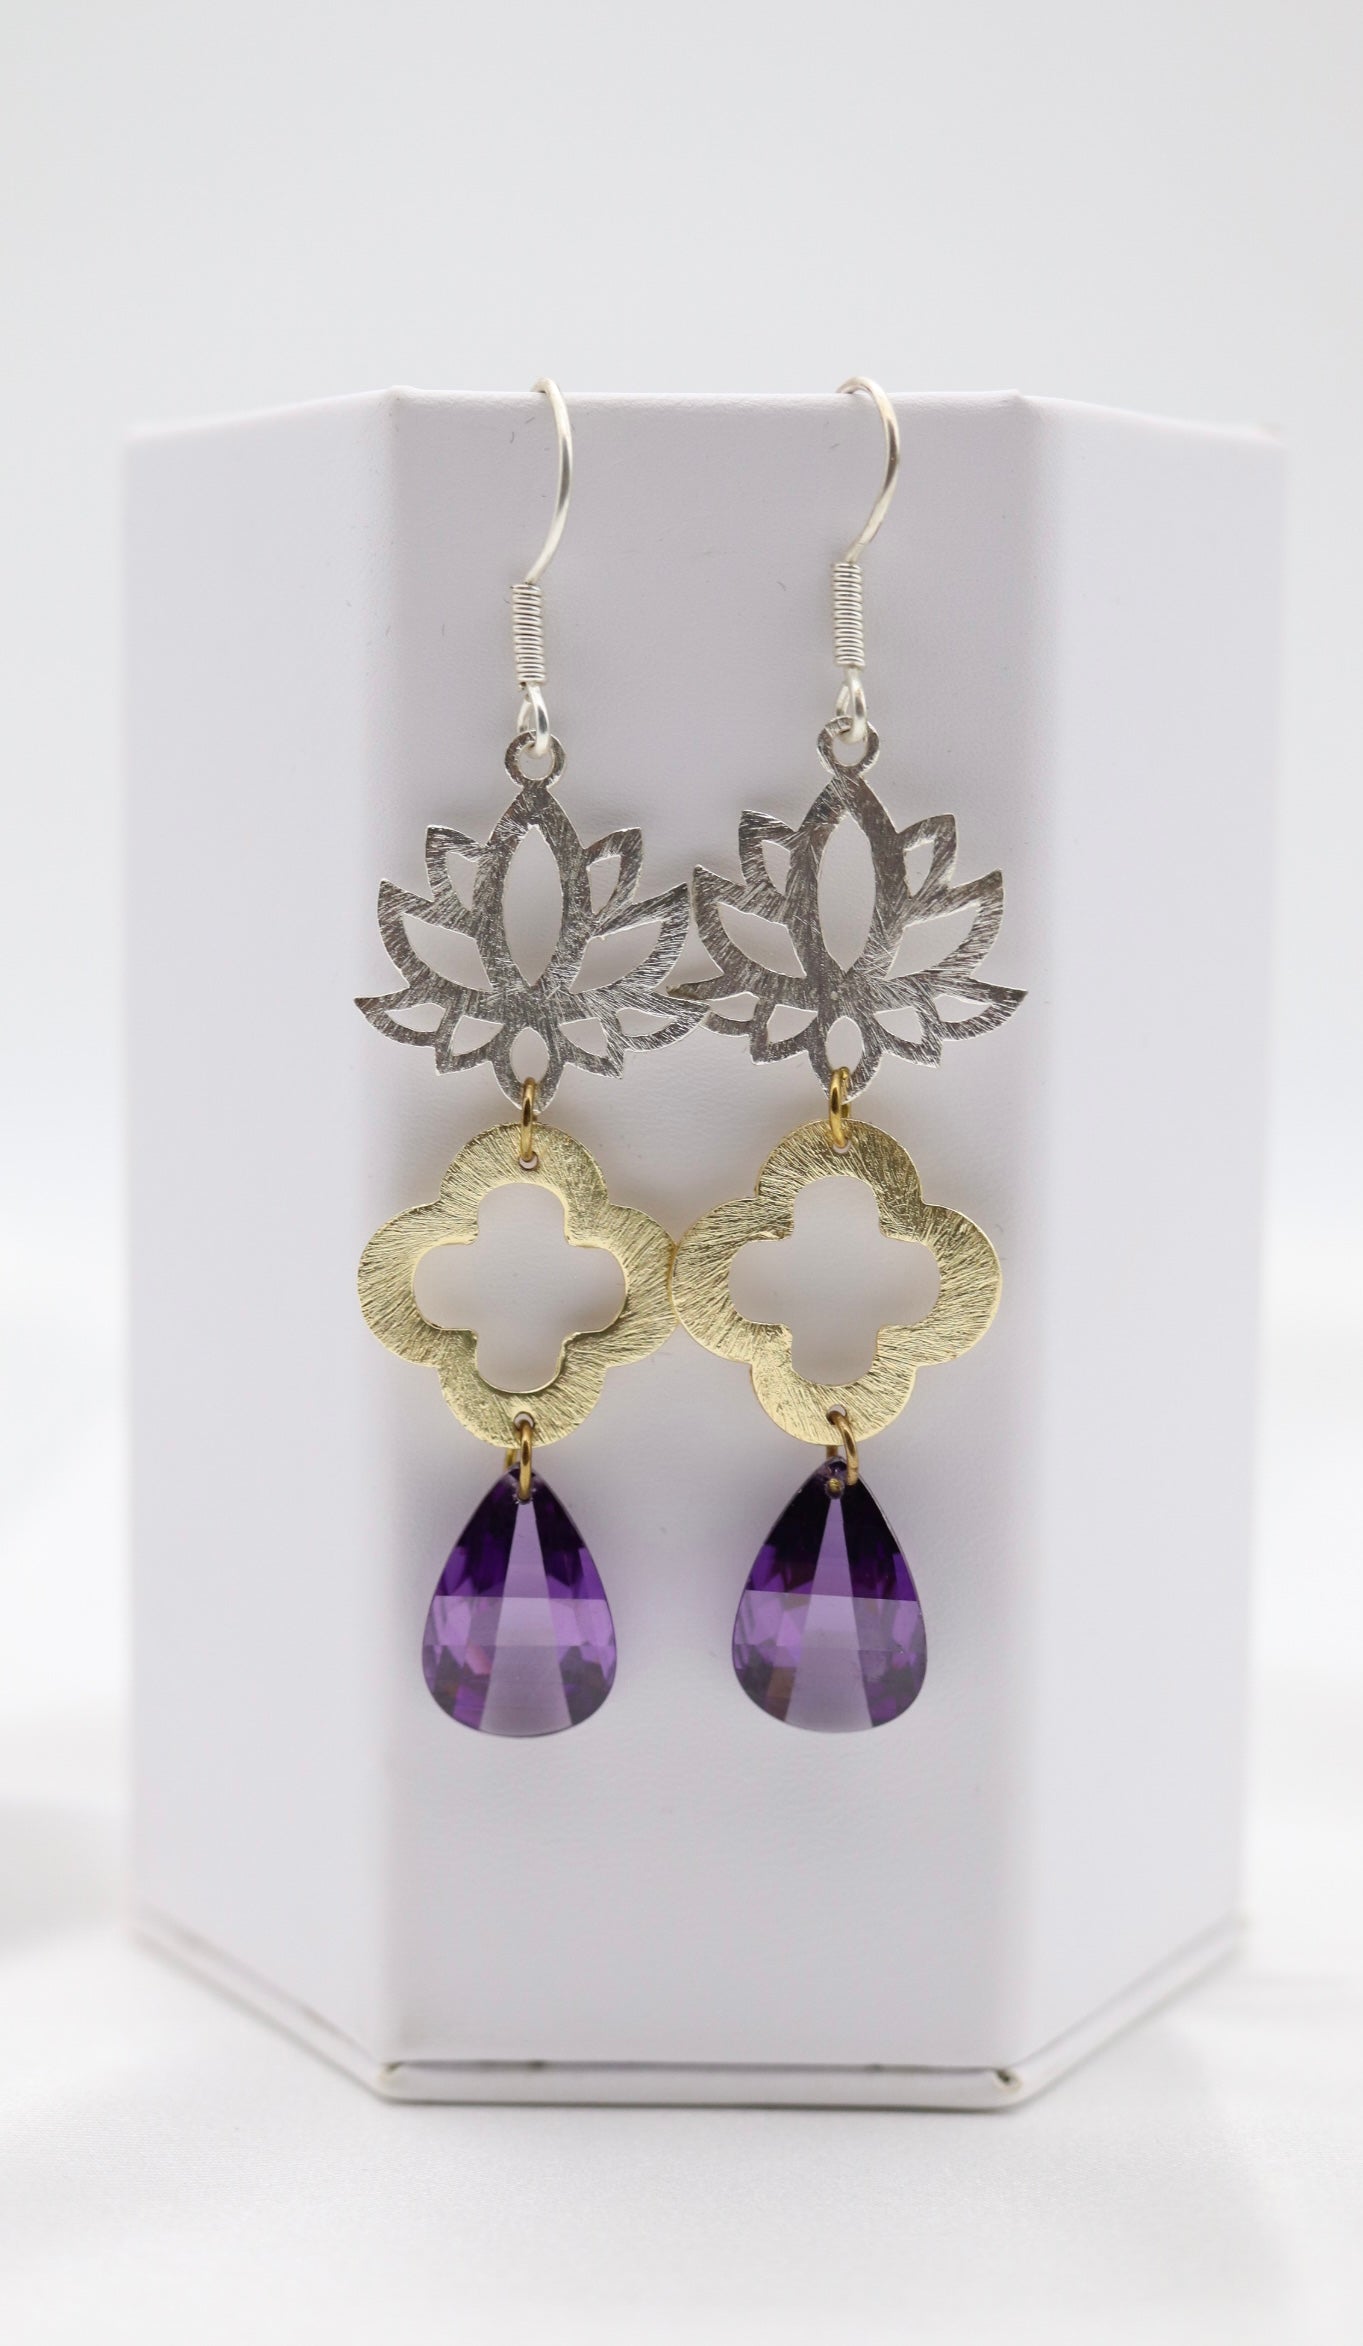 Filigree Dangling Purple Stone Earrings Made With Faceted Fancy Cut Cubics